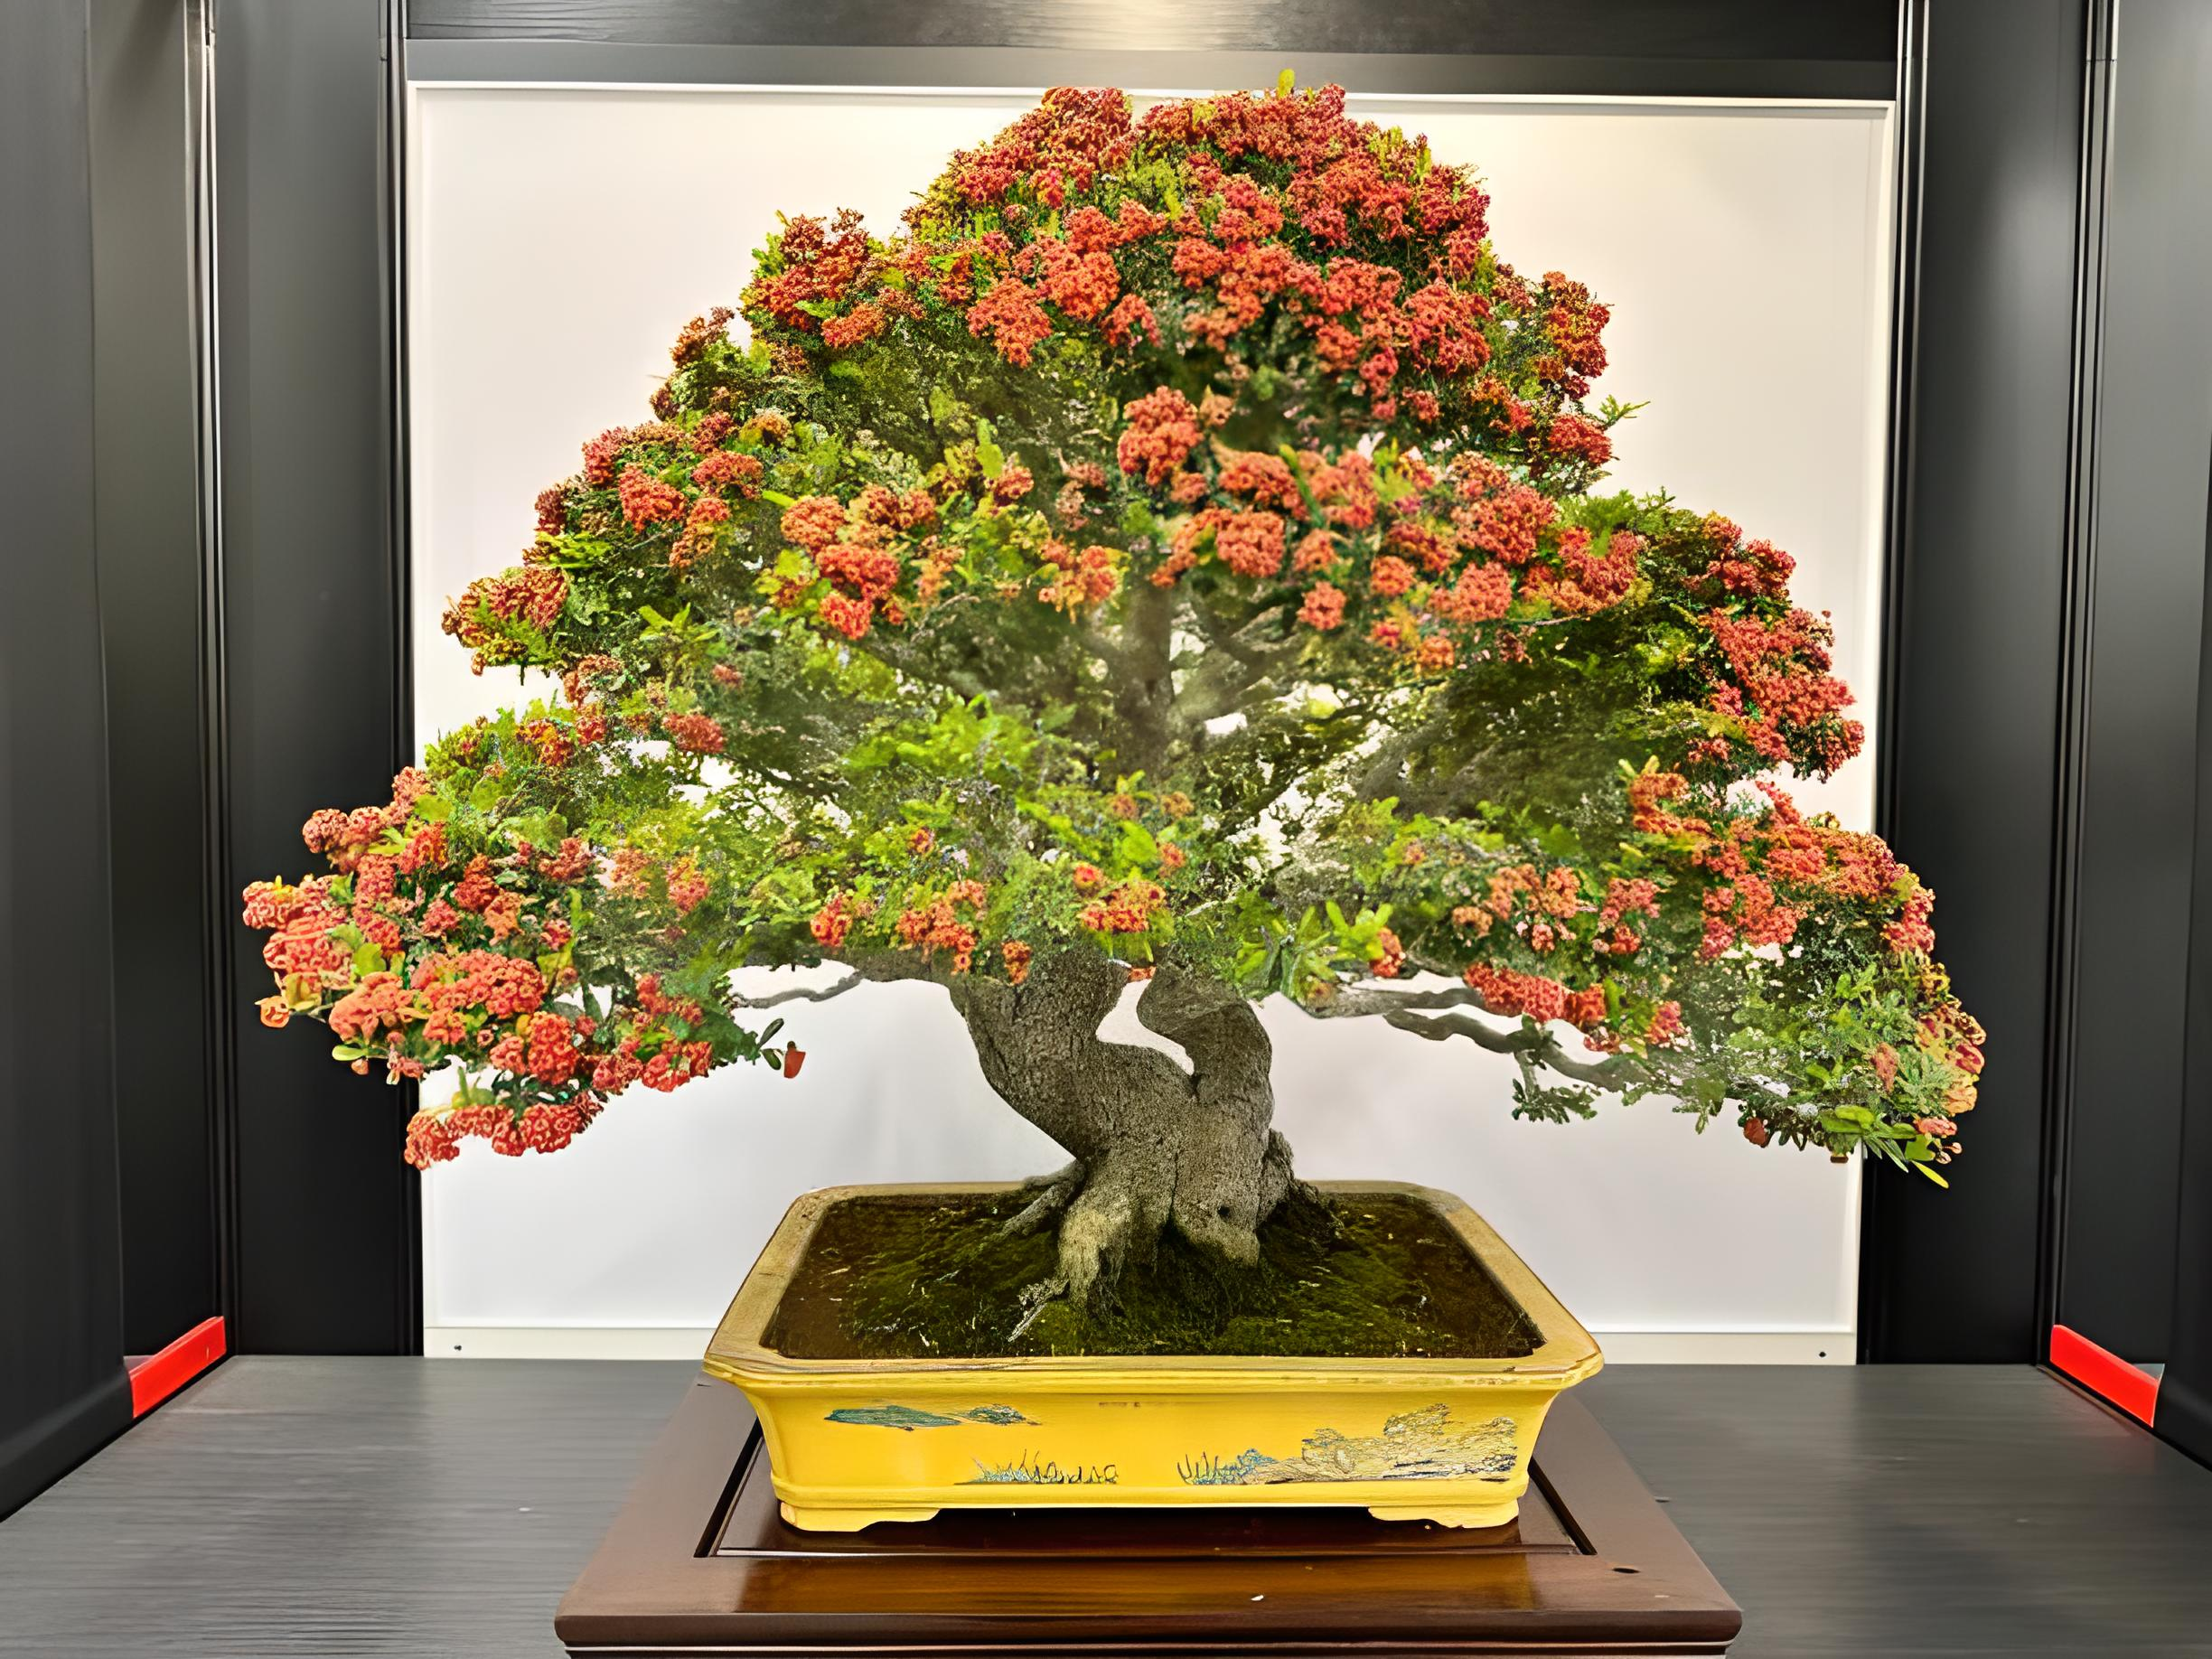 A robust bonsai tree in full bloom, illustrating the mental health benefits of bonsai cultivation